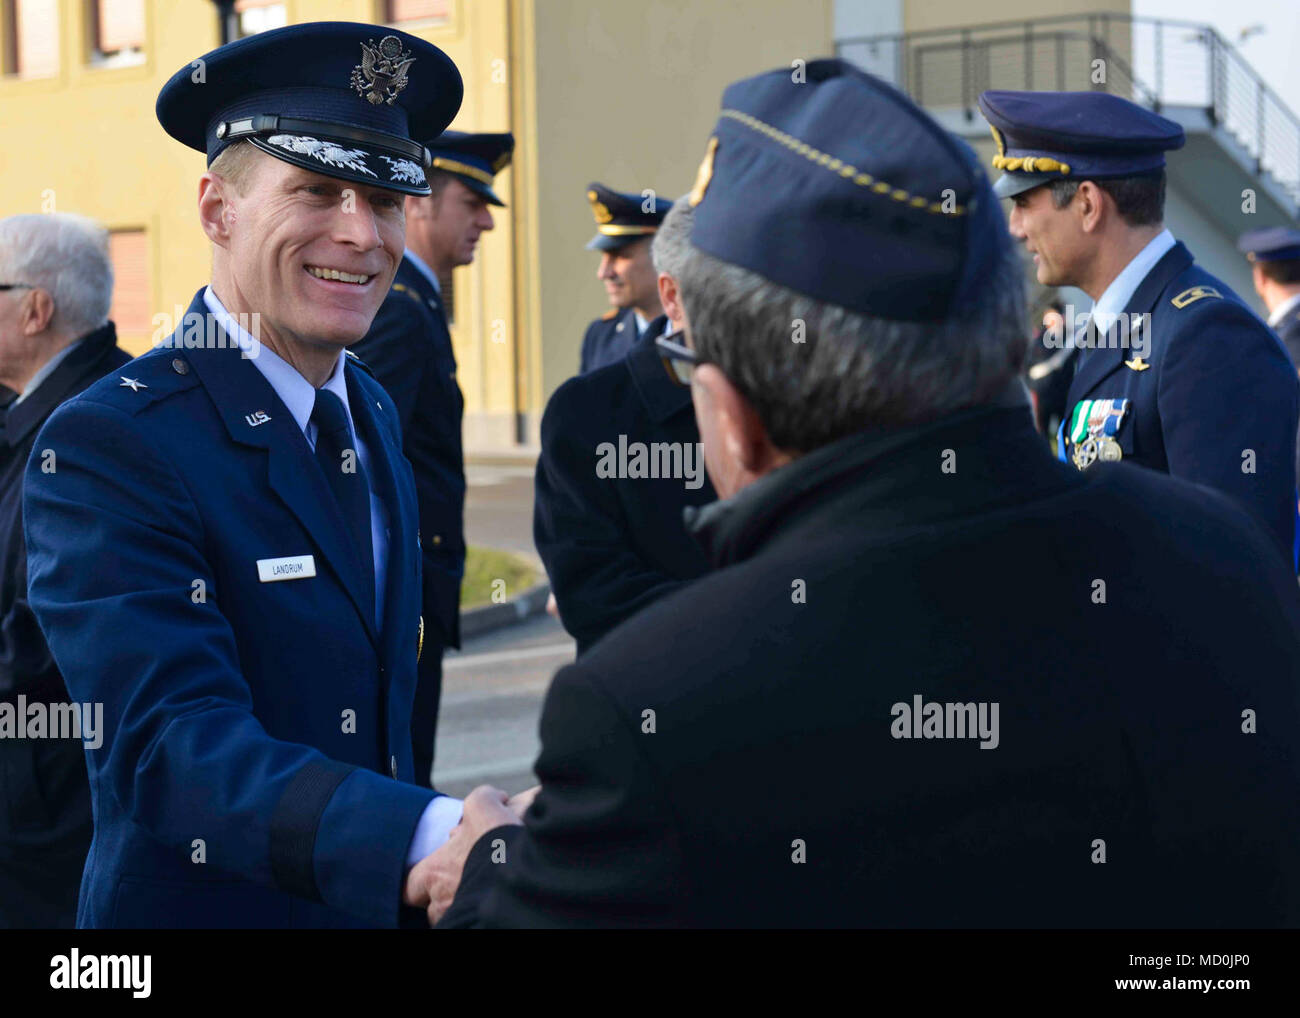 The Italian Royal Air Force was created on March 28, 1923, which became the Aeronautica Militare (Italian Air Force) later. Brig. Gen. Lance Landrum, 31st Fighter Wing commander, attended the ceremony commemorating the event. Stock Photo